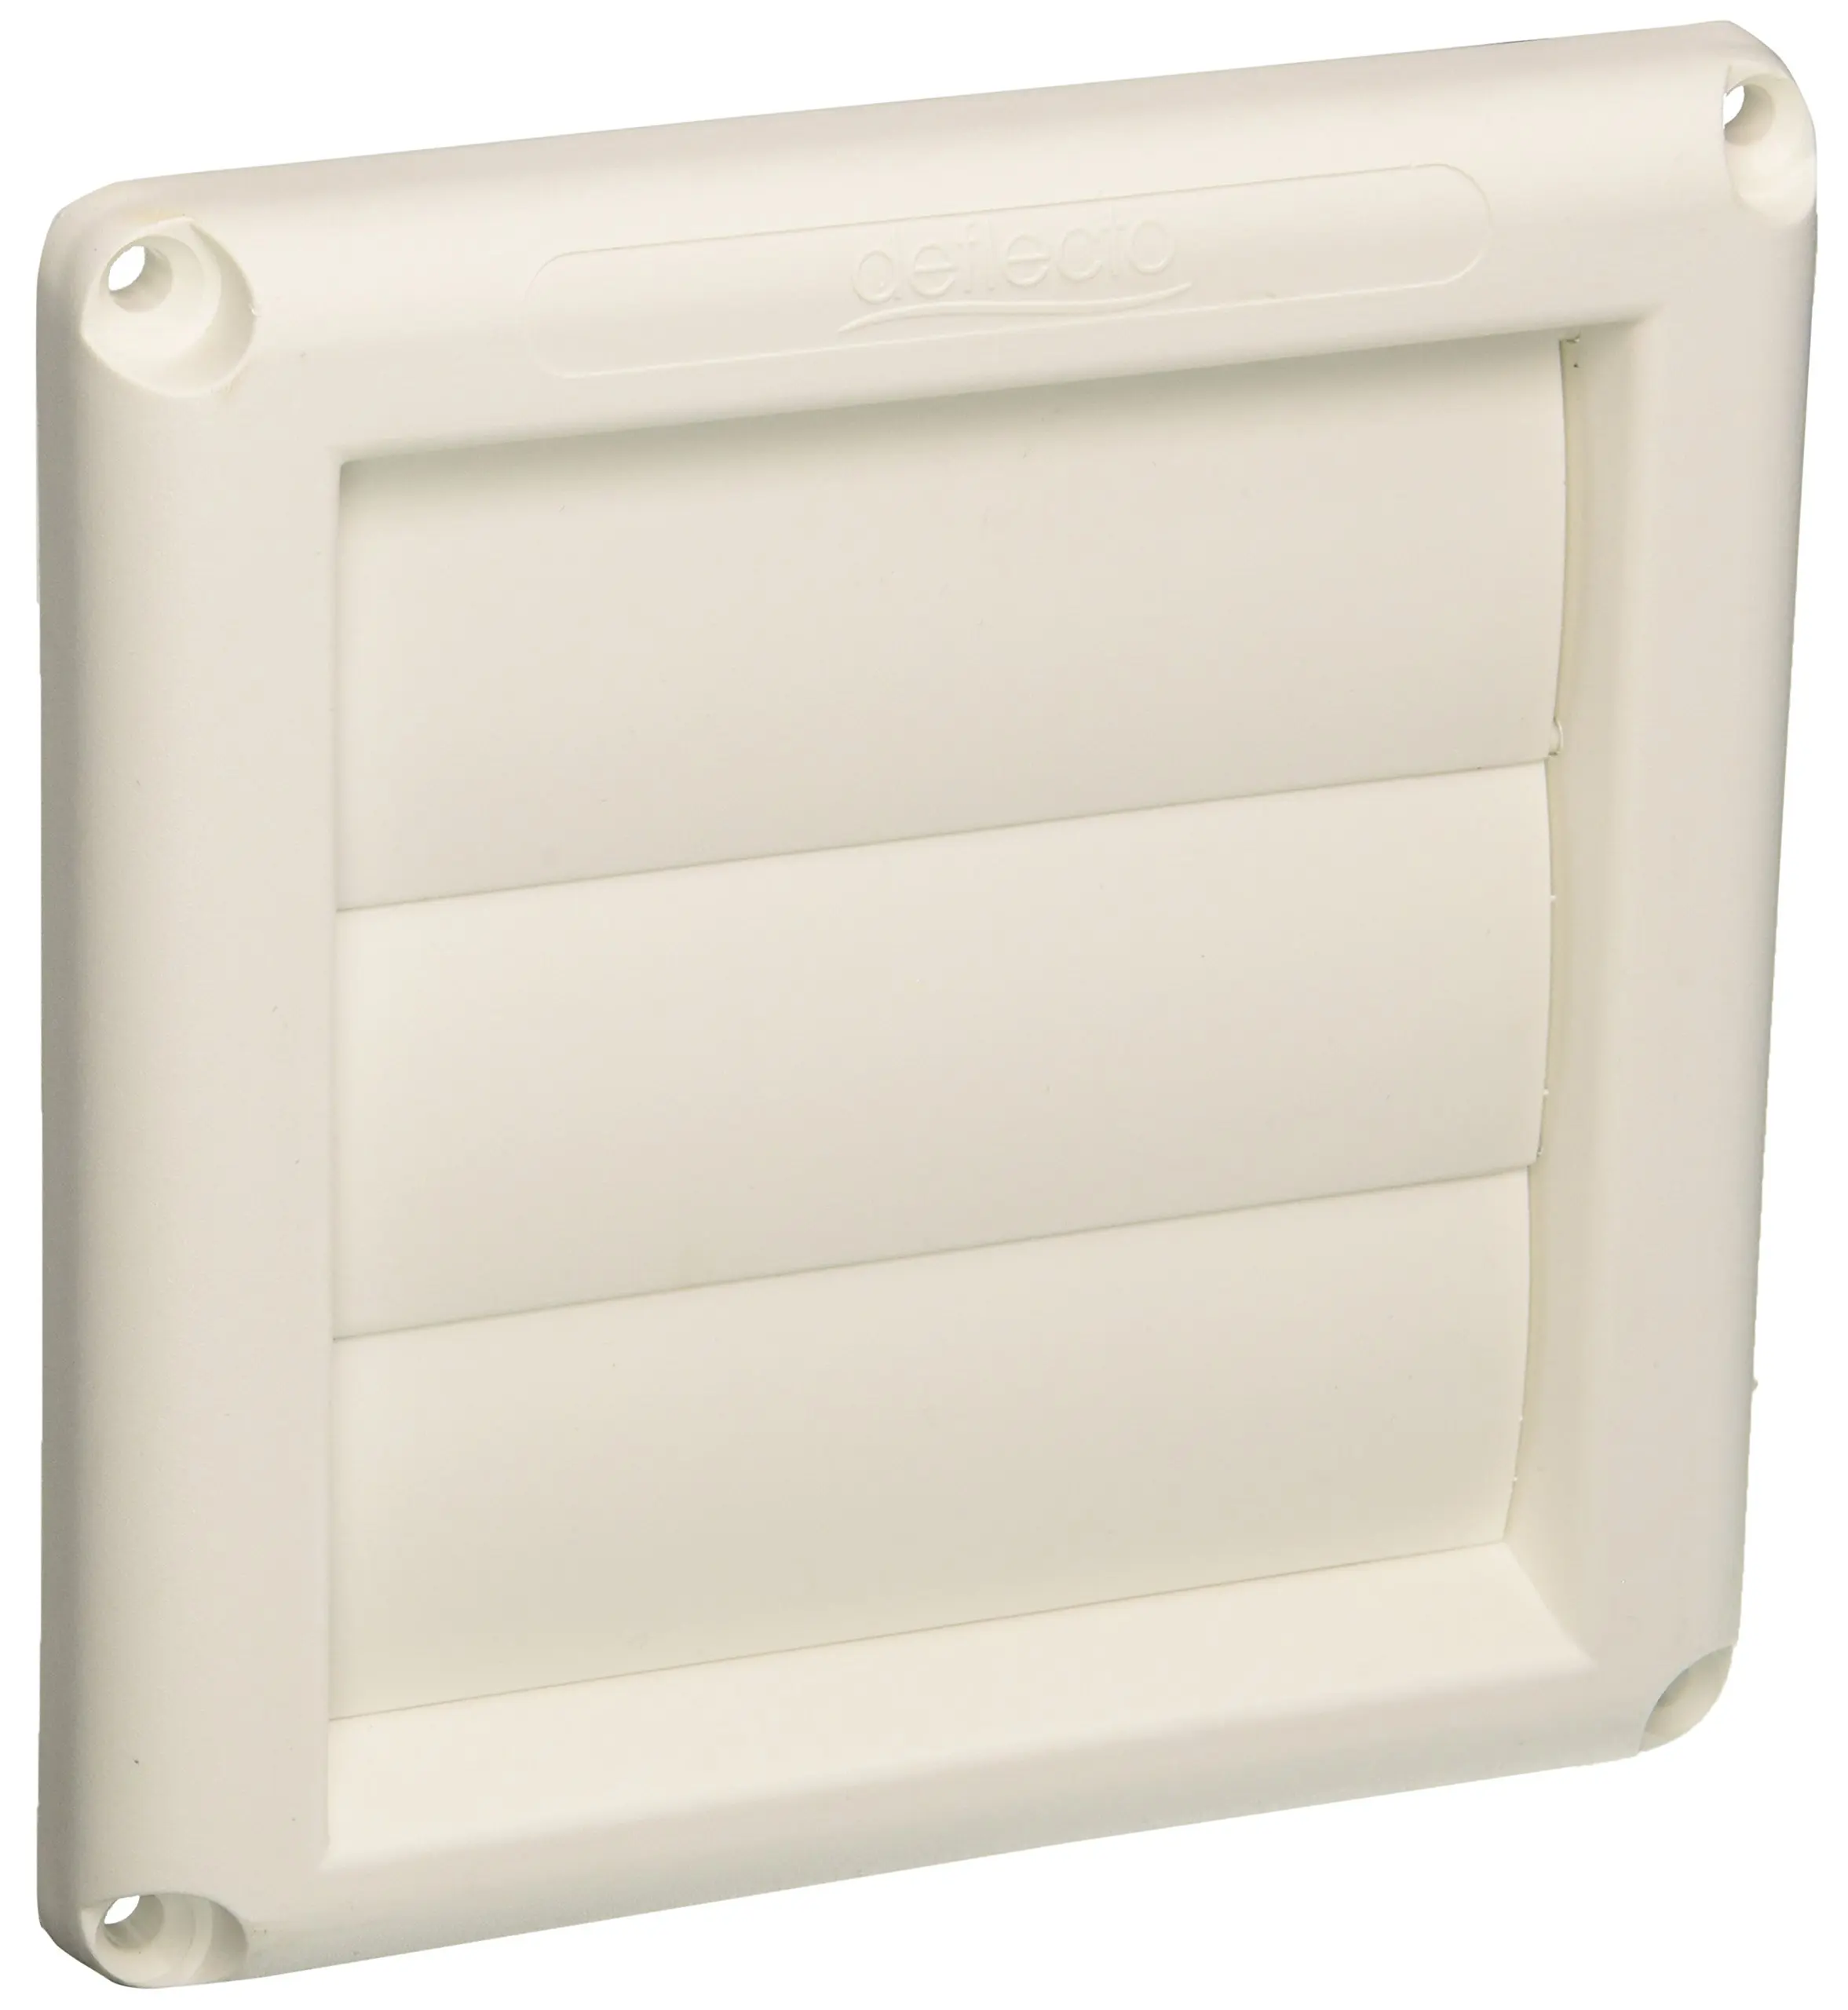 Cheap Louvered Vent Cover, find Louvered Vent Cover deals on line at